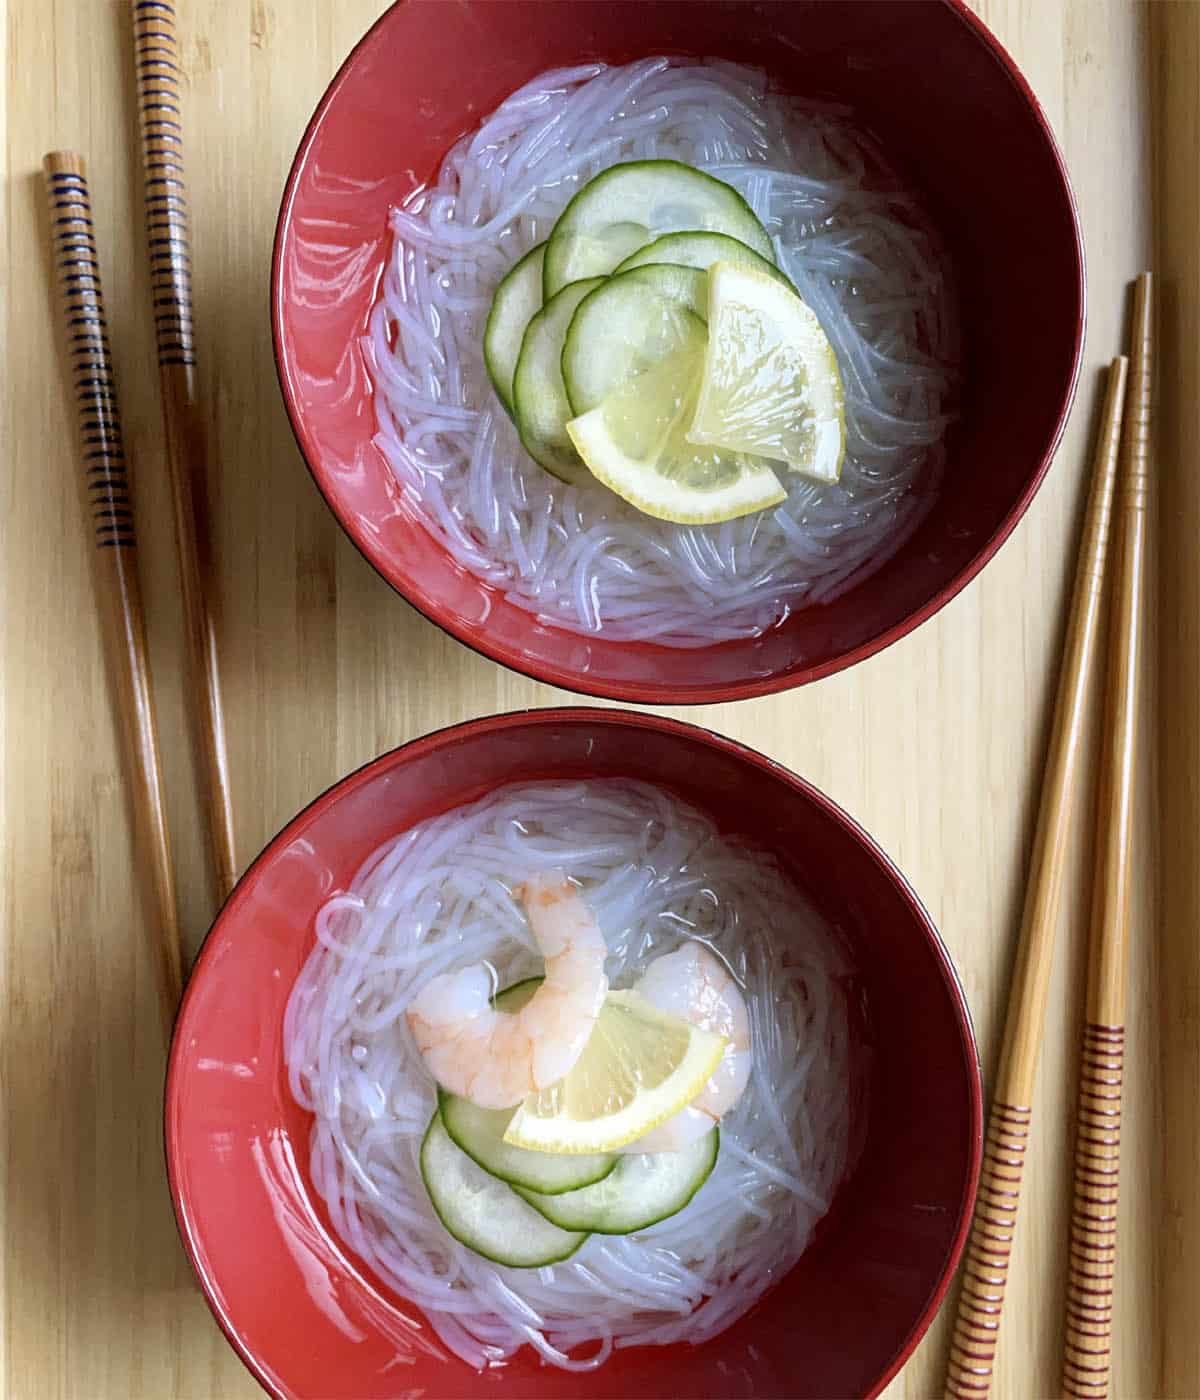 Two pairs of wooden chopsticks next to two red bowls containing white noodles, cucumber slices, cooked shrimp, and lemon slice wedges.